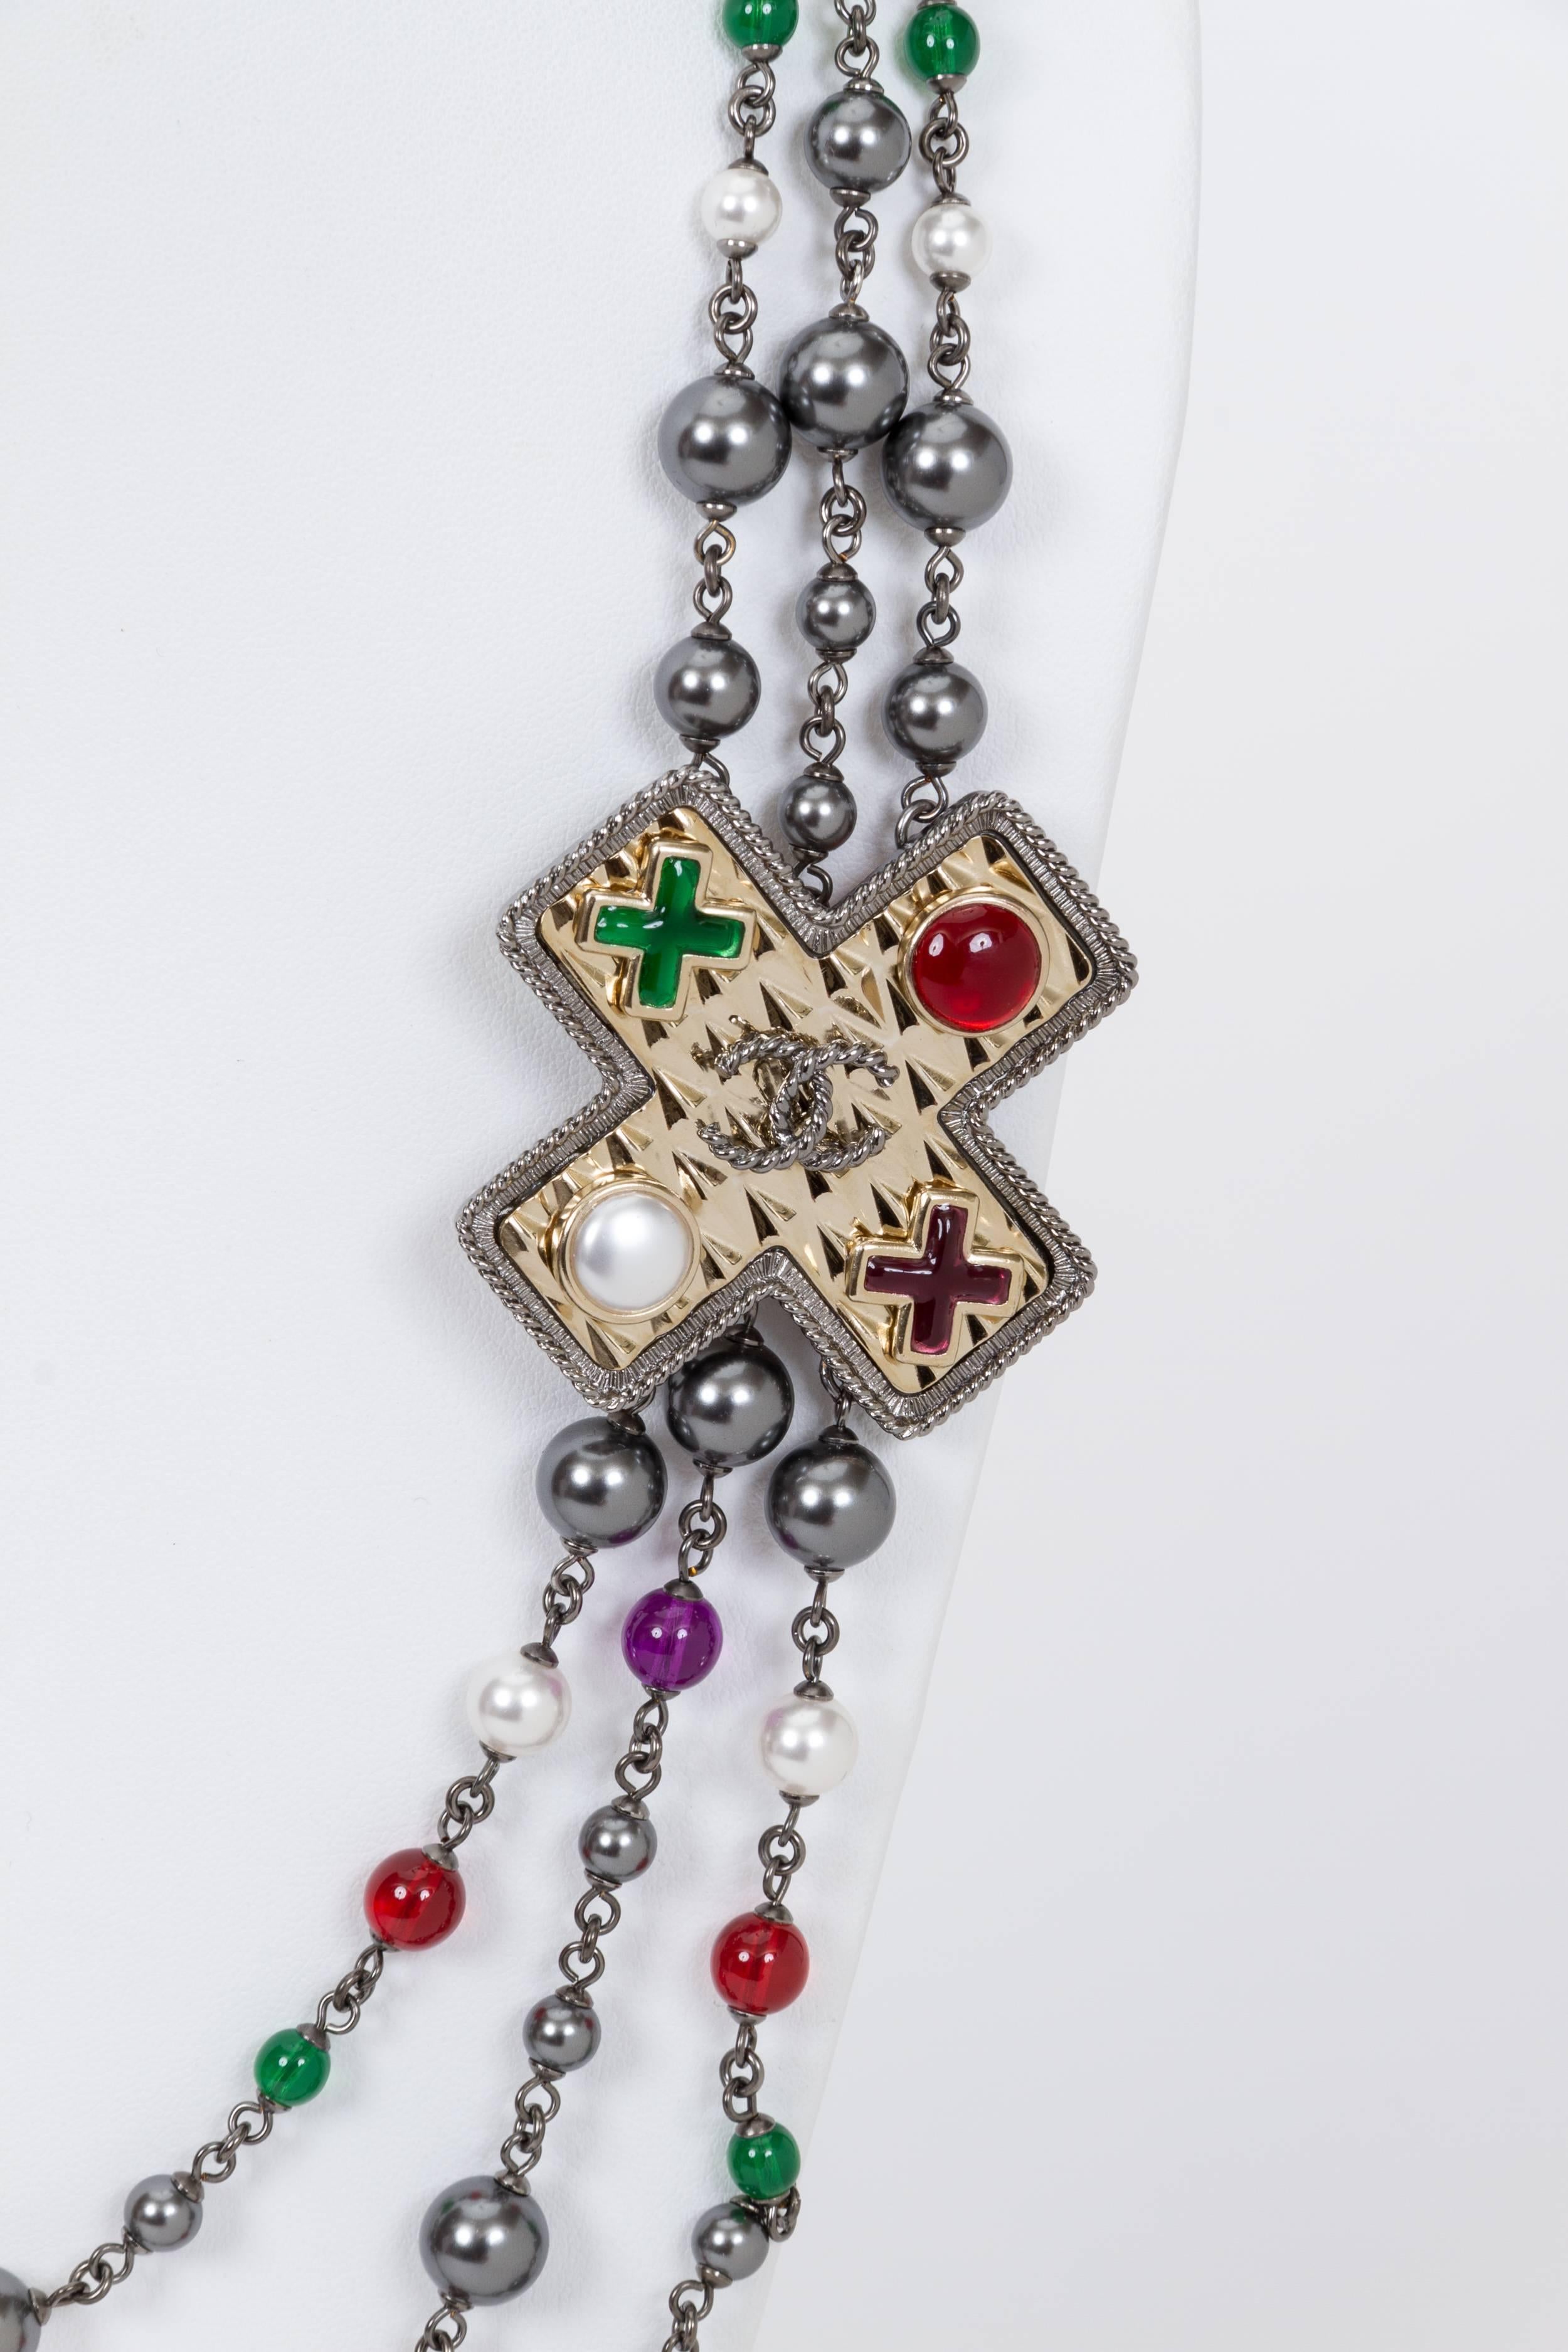 Chanel brand new in box triple strand necklace with accent Maltese cross on the side. Gunmetal with grey pearls and red, green and purple gripoix beads. Spring 2017 collection. Unworn, comes with original tag, velvet pouch and box.